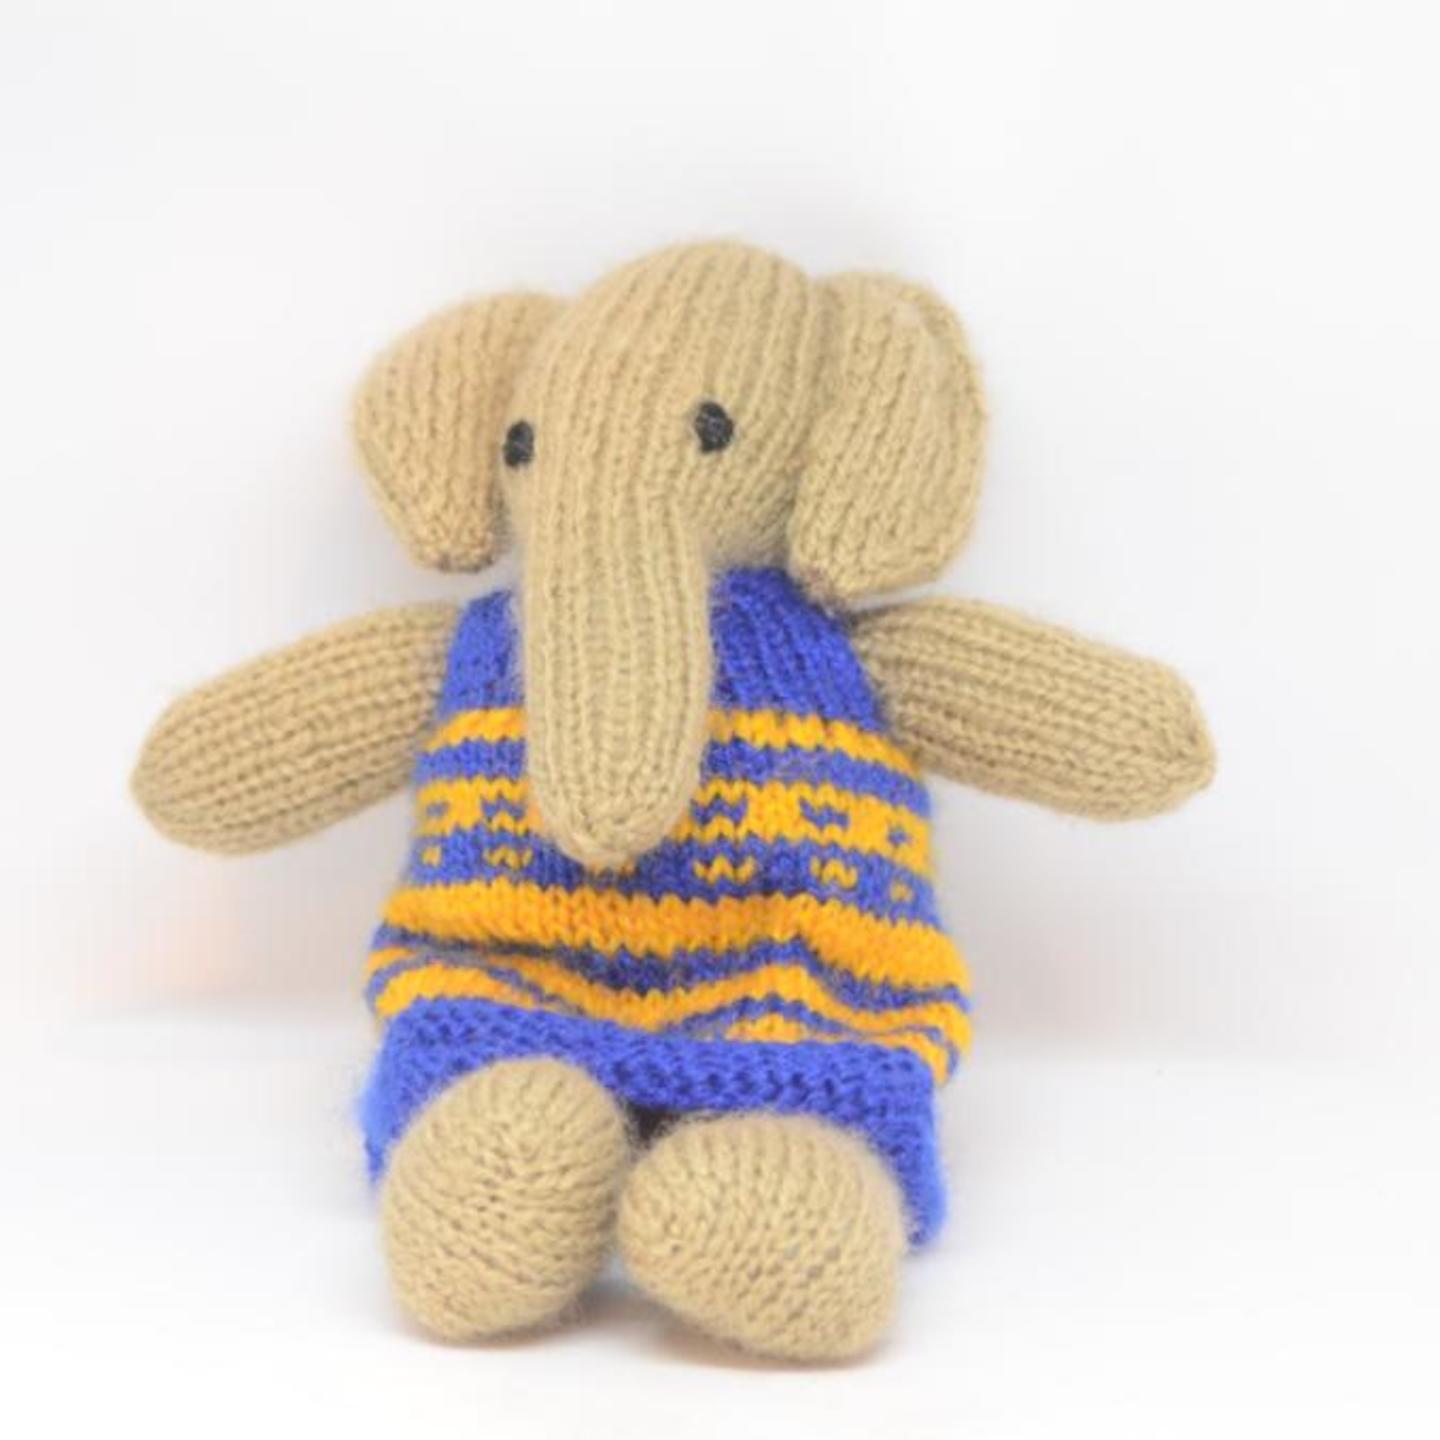 Hand knitted Elephant